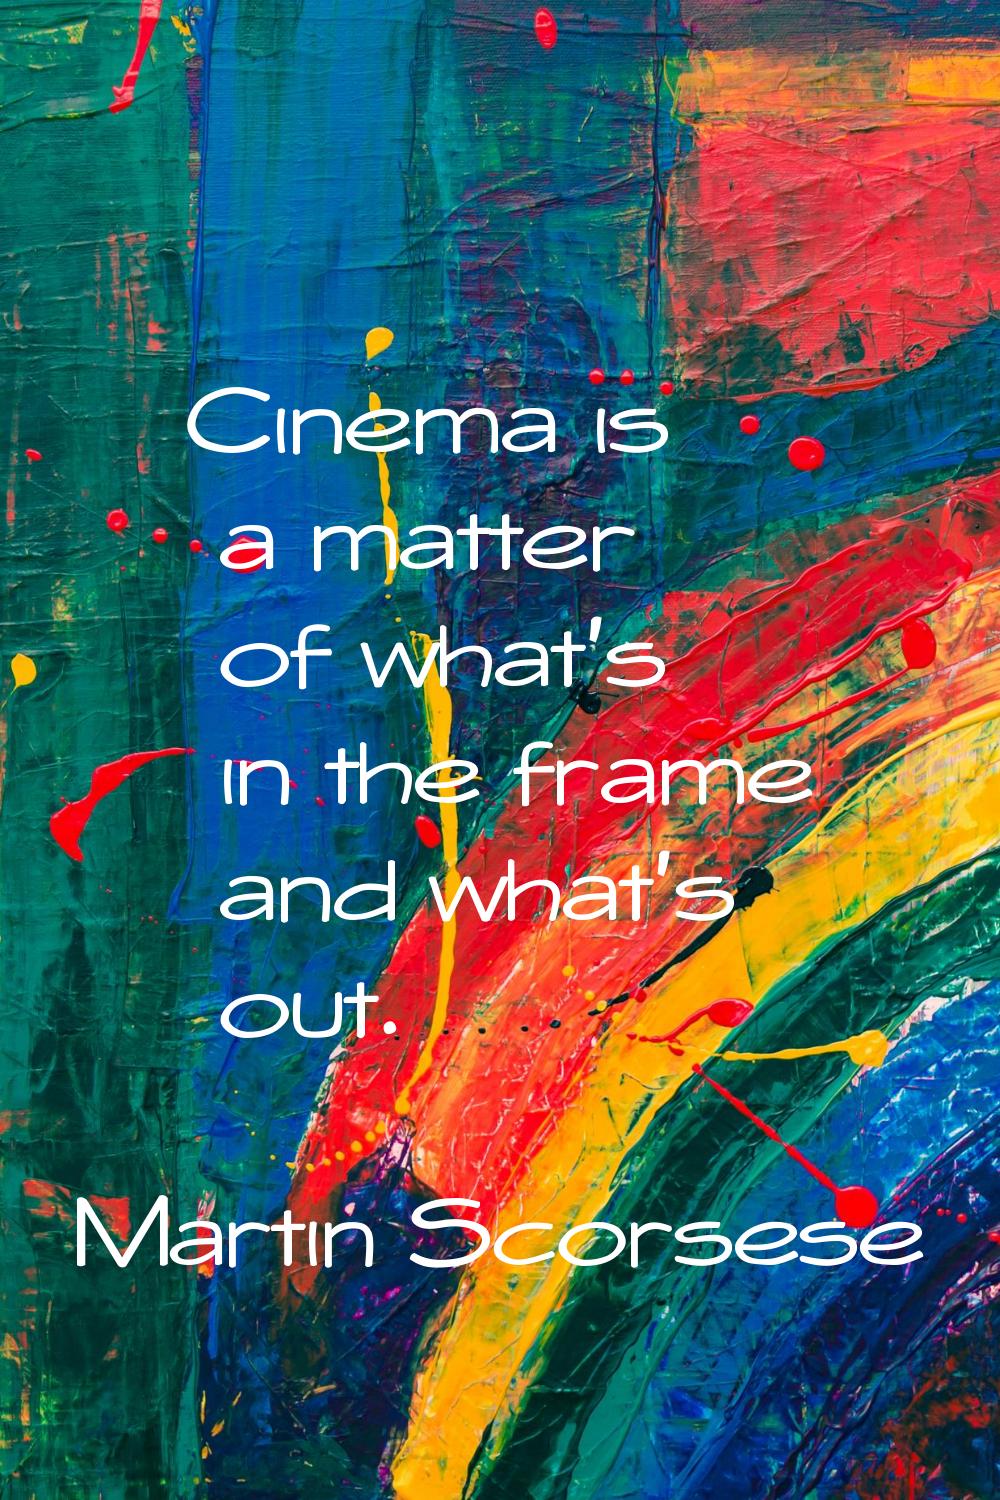 Cinema is a matter of what's in the frame and what's out.